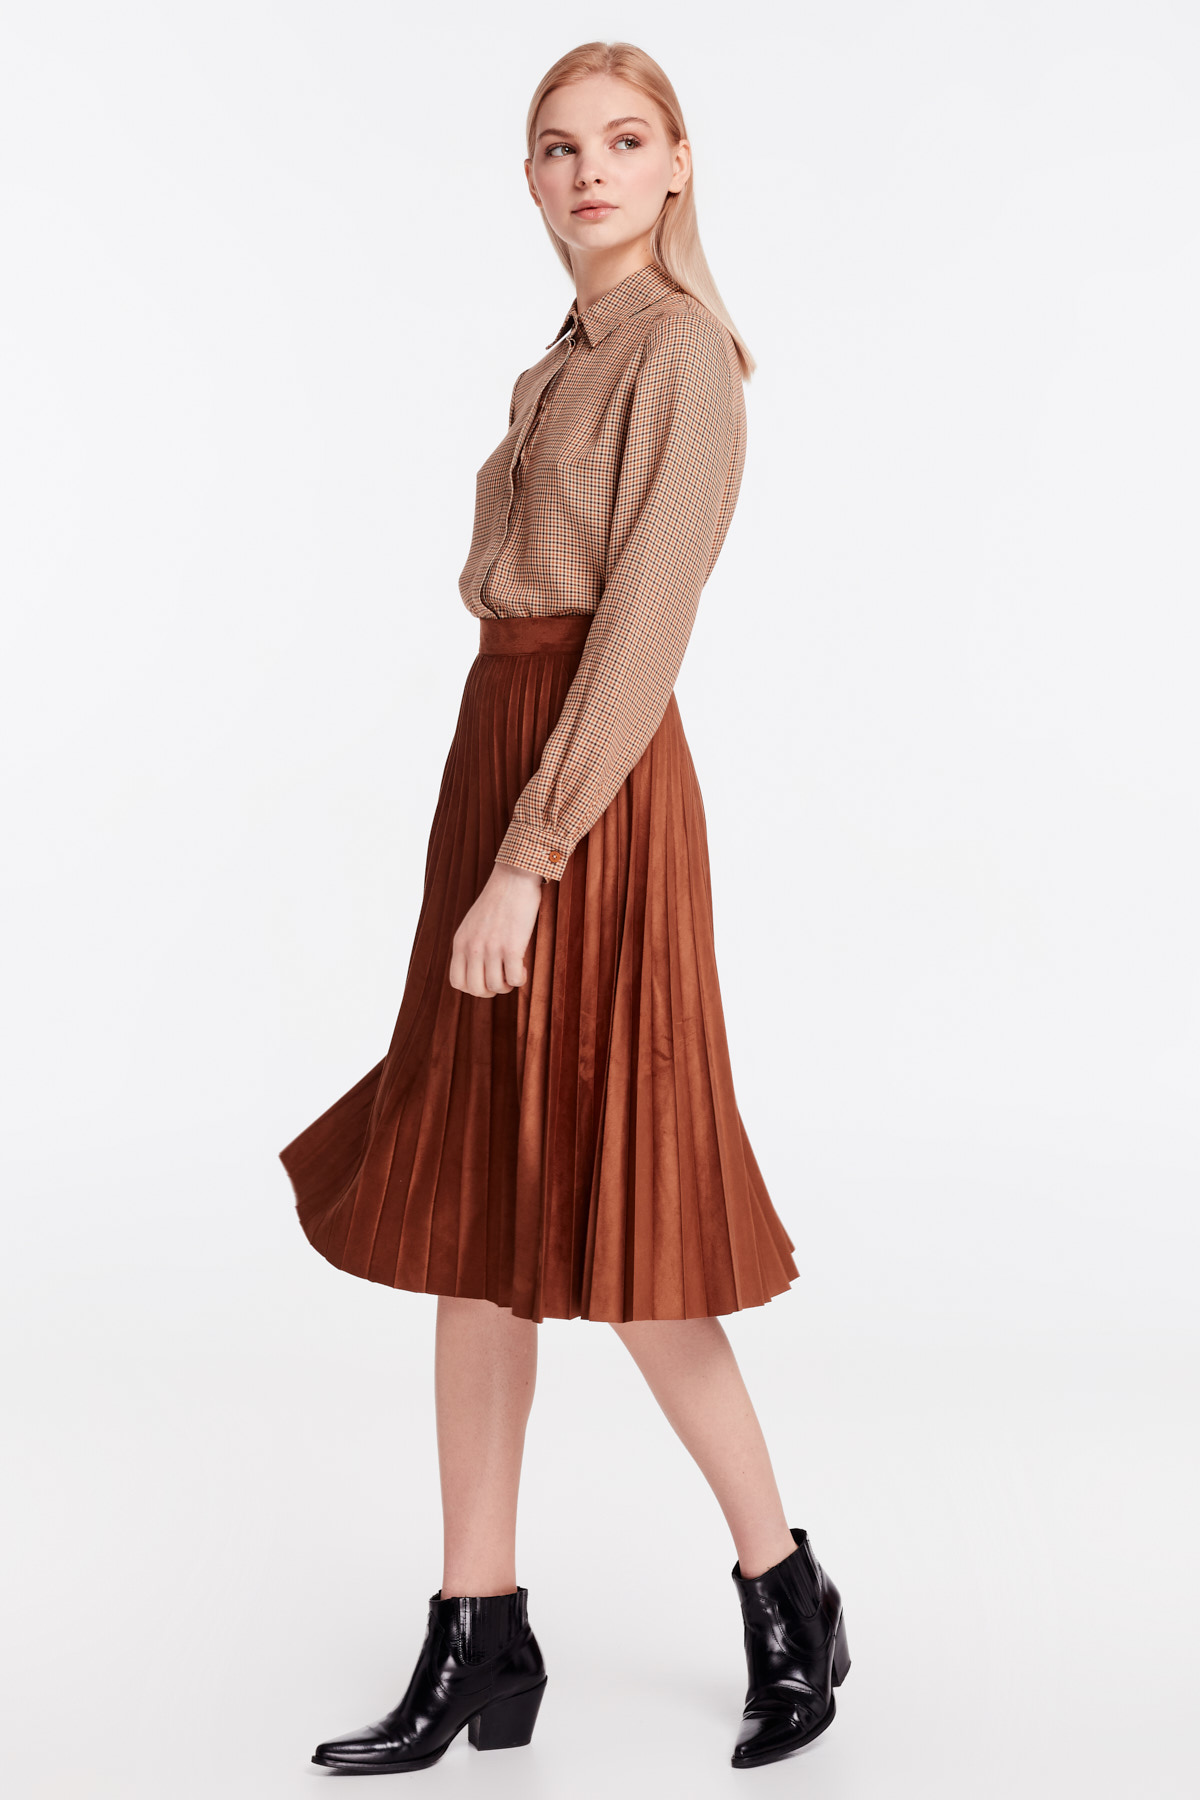 Brown suede pleated skirt, photo 6